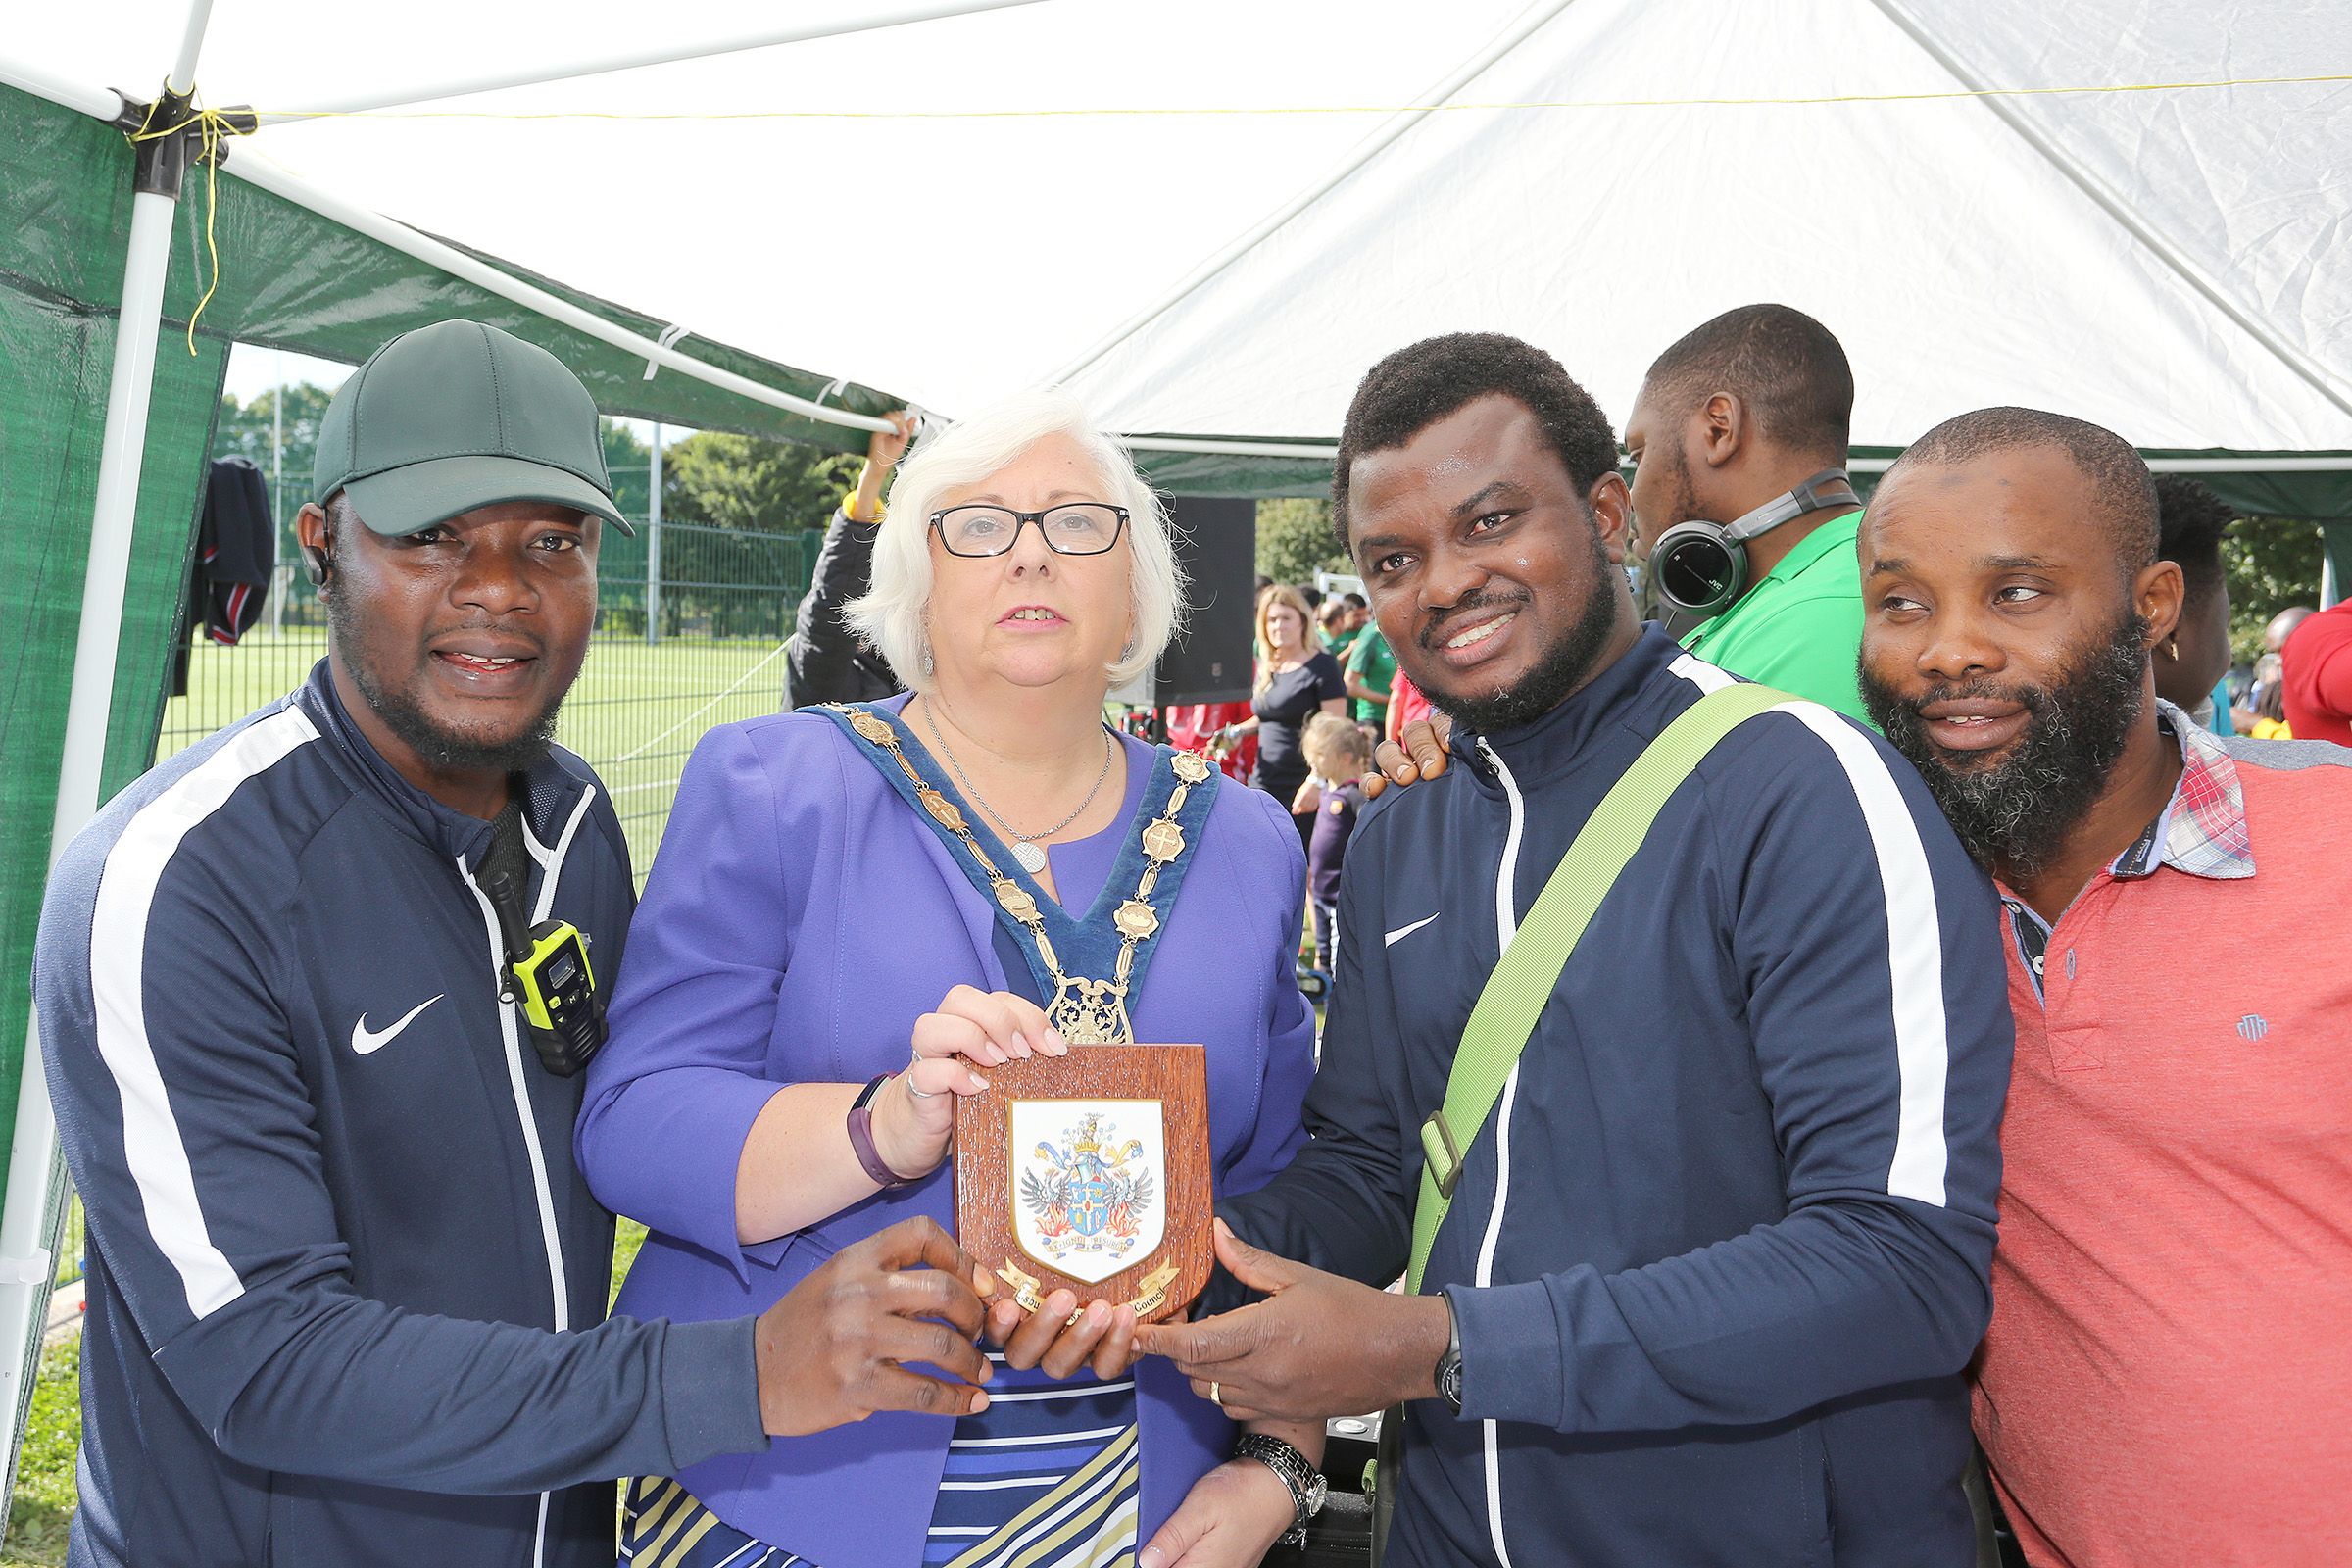 PLAYING OUR PART: Inter-Community Football League Final and Family Fun day in 2017 organised by African-Caribbean Sports Forum NI pic: Organisers Jay Emmanuel and Adekanmi Abayomi present to Dep Mayor of Lisburn and Castlereagh Hazel Legge